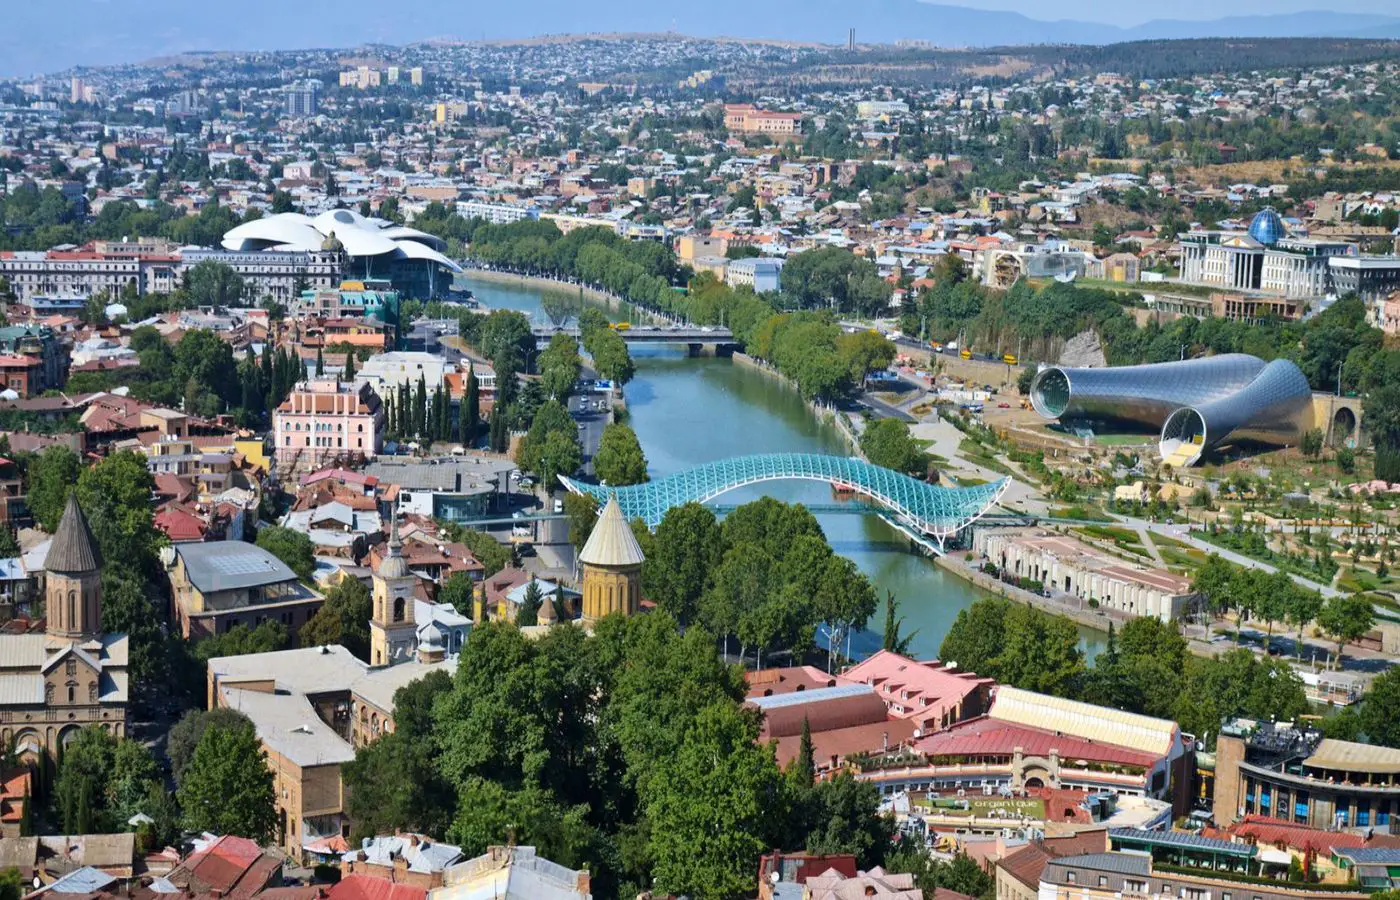 Where to go in Tbilisi - Tourist's guide to Tbilisi's attractions